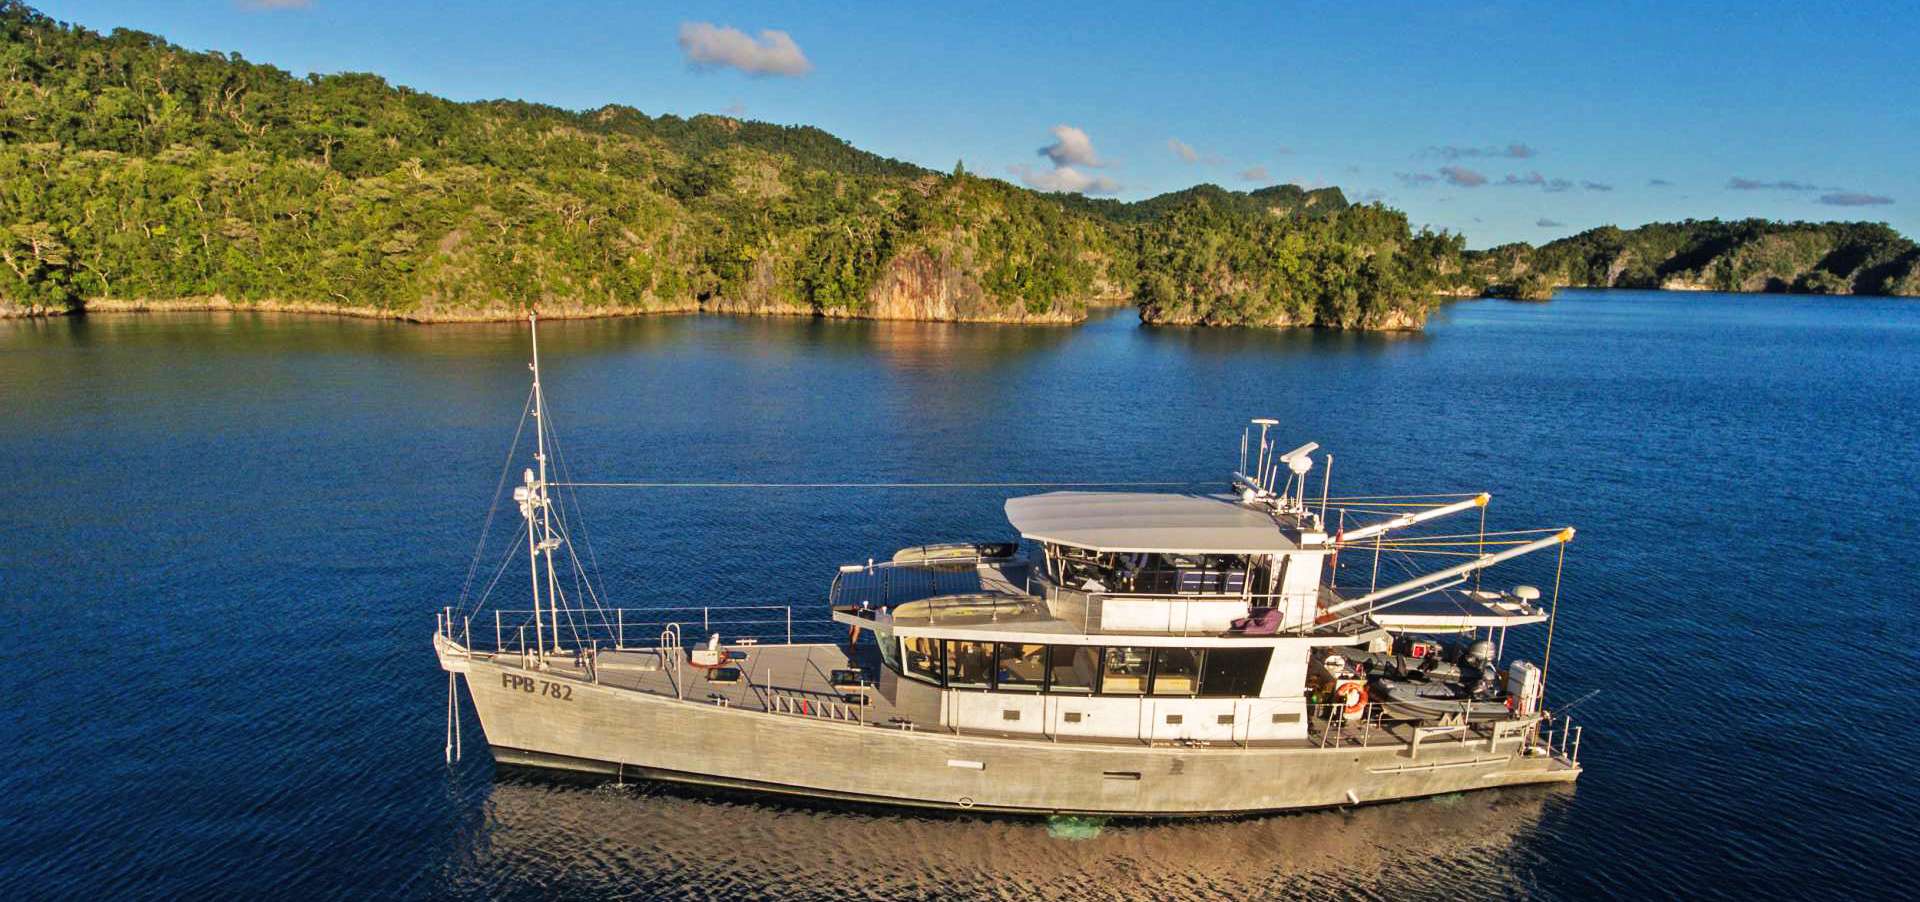 GREY WOLF Yacht Charter - Ritzy Charters